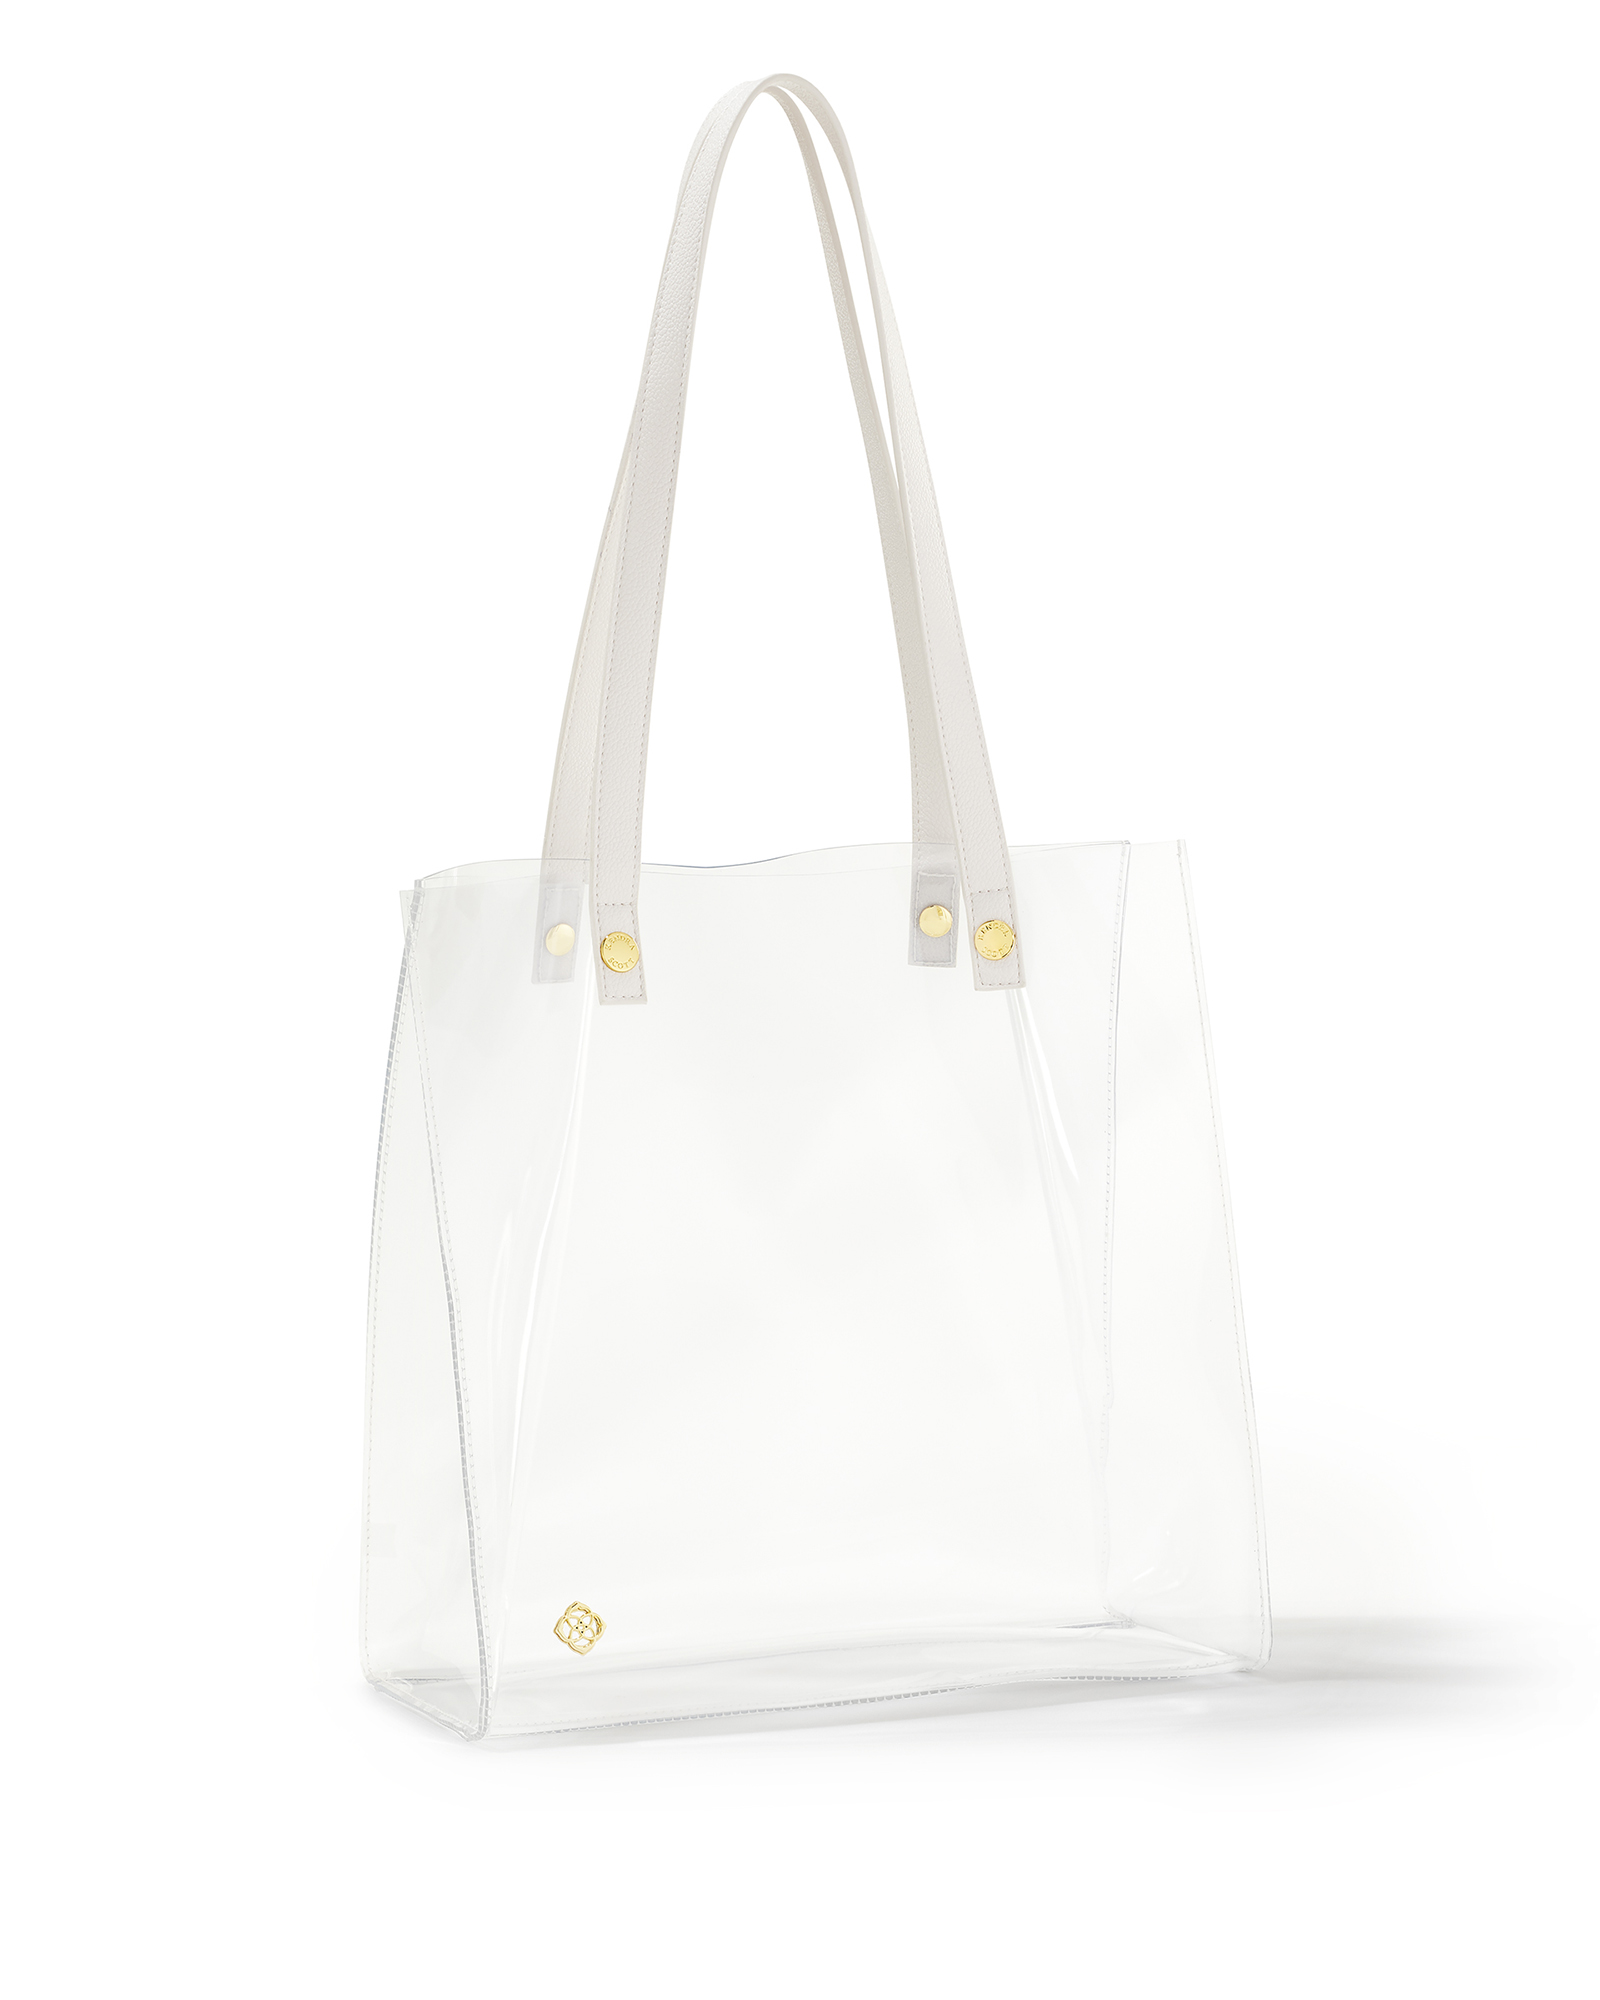 Gameday Bag - Blush Leather / Clear PVC Blush Leather/Clear PVC/Gold Hardware